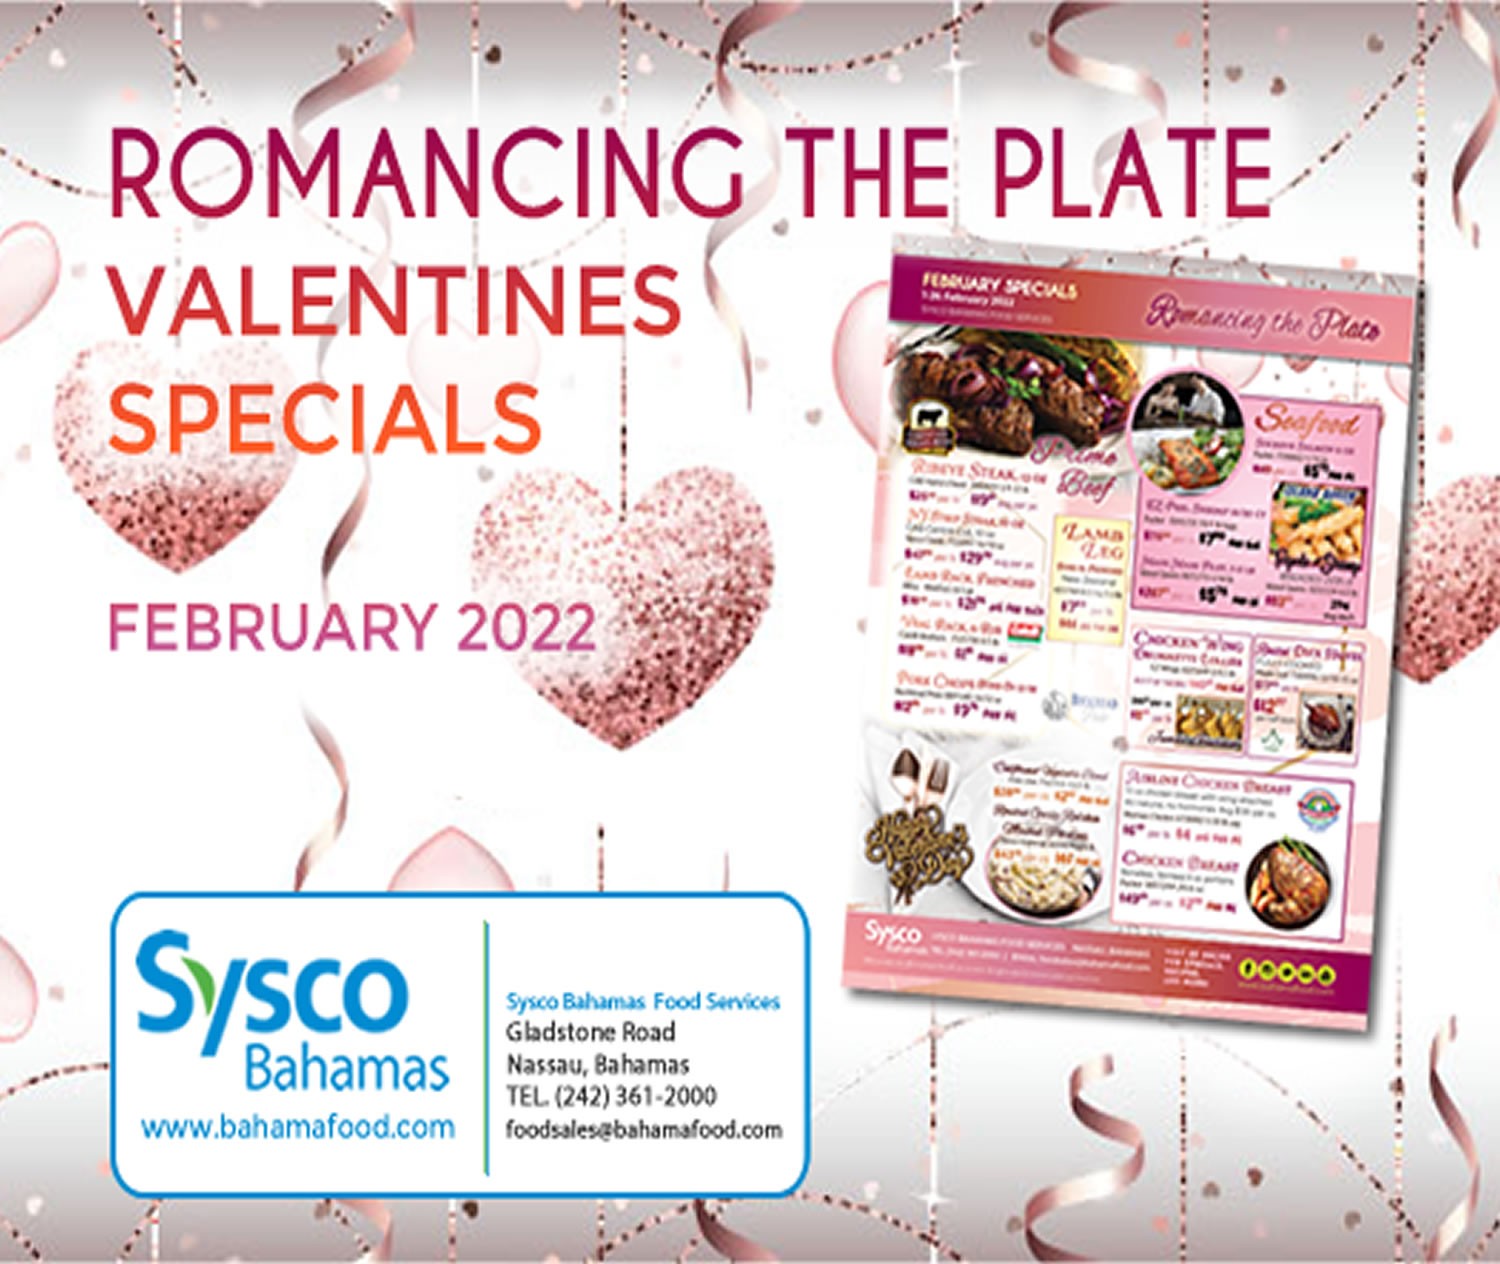 Romancing the Plate ~ Sweet Deals for Vday